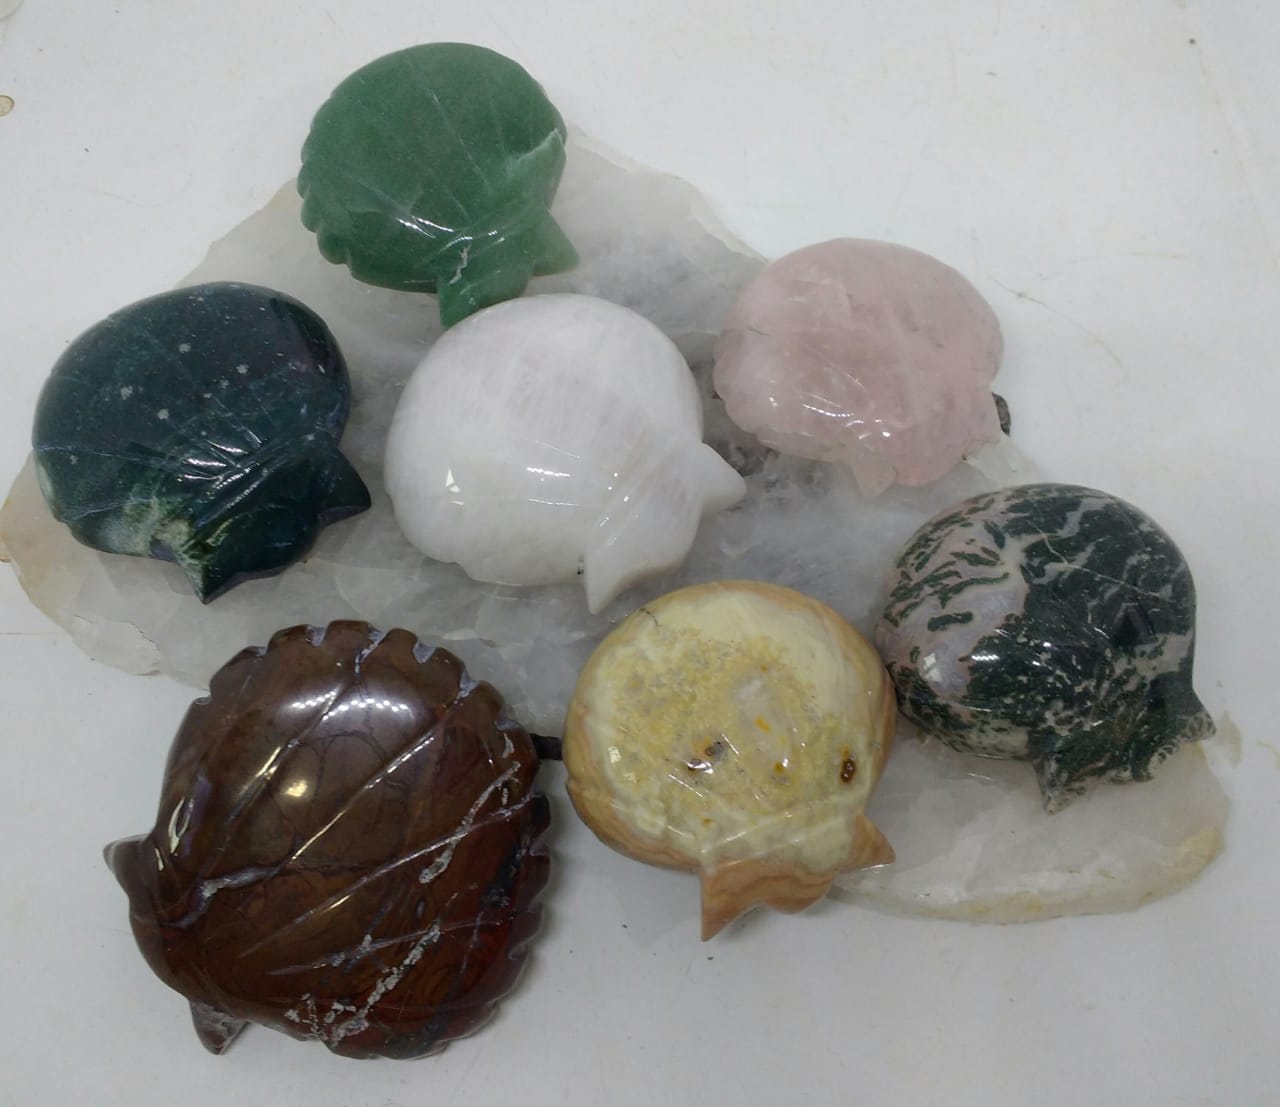 Stones from Uruguay - Gemstone Shell Shapes for Decoration, Gift and Metaphysical